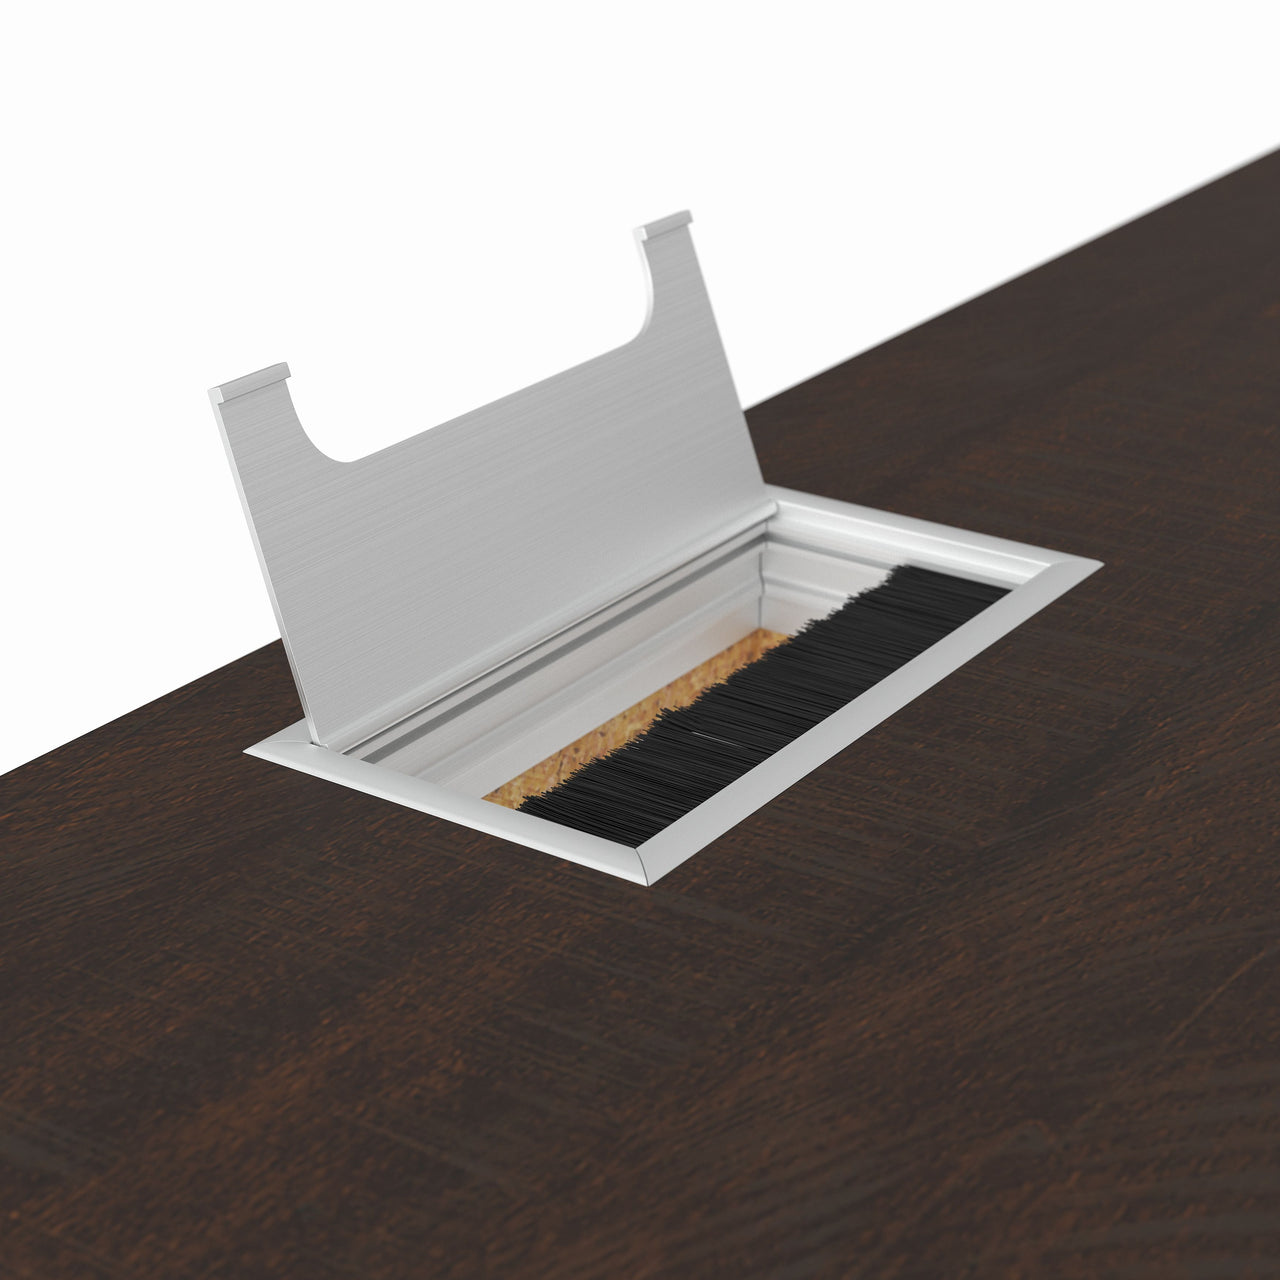 Camiburg - Warm Brown - Home Office Small Desk - Tony's Home Furnishings